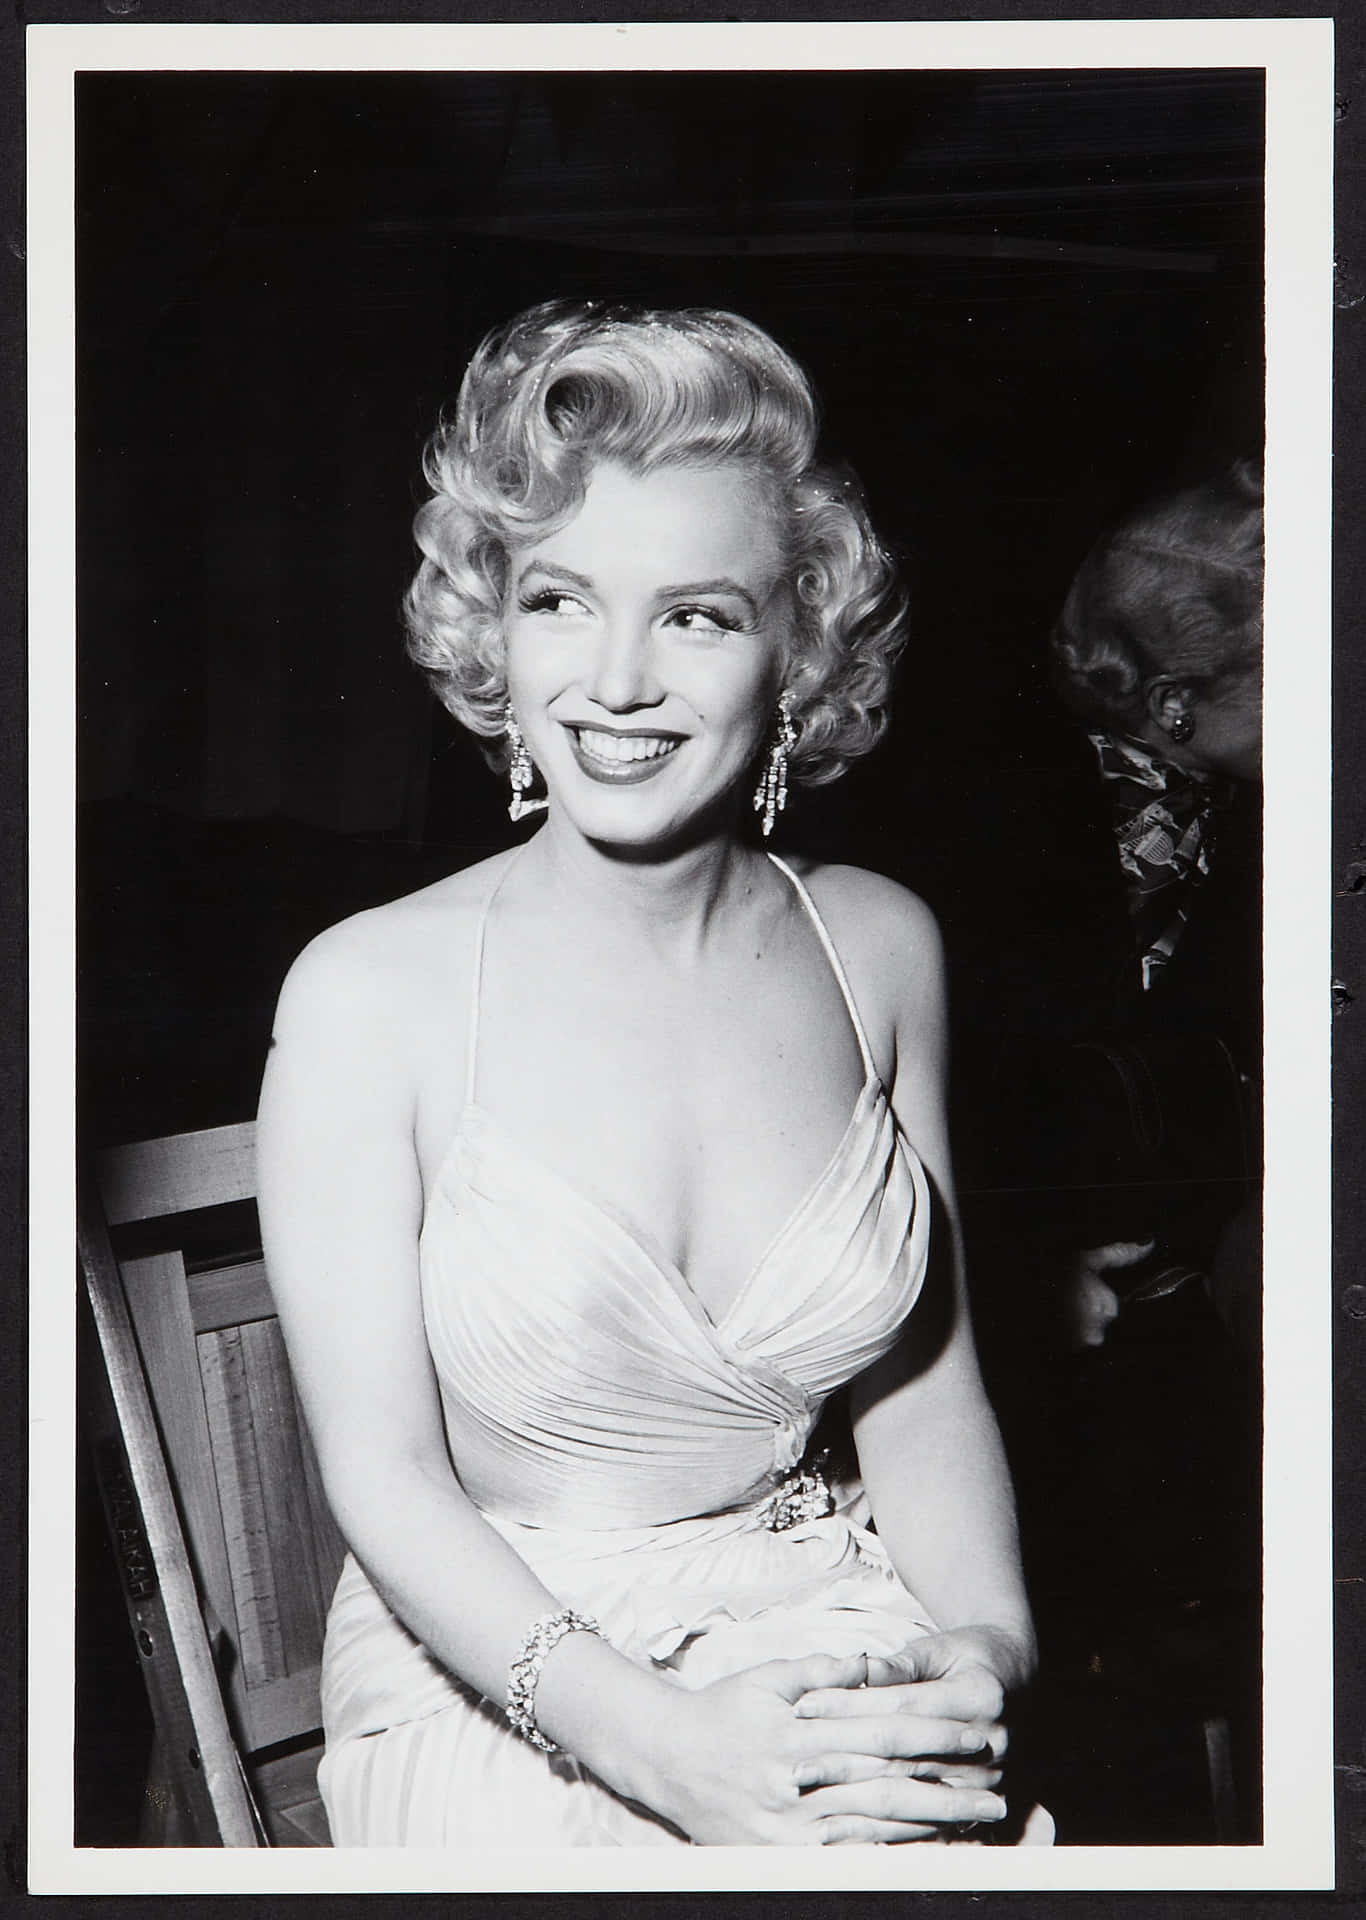 Marilyn Monroe - Iconic Actress and Sex Symbol